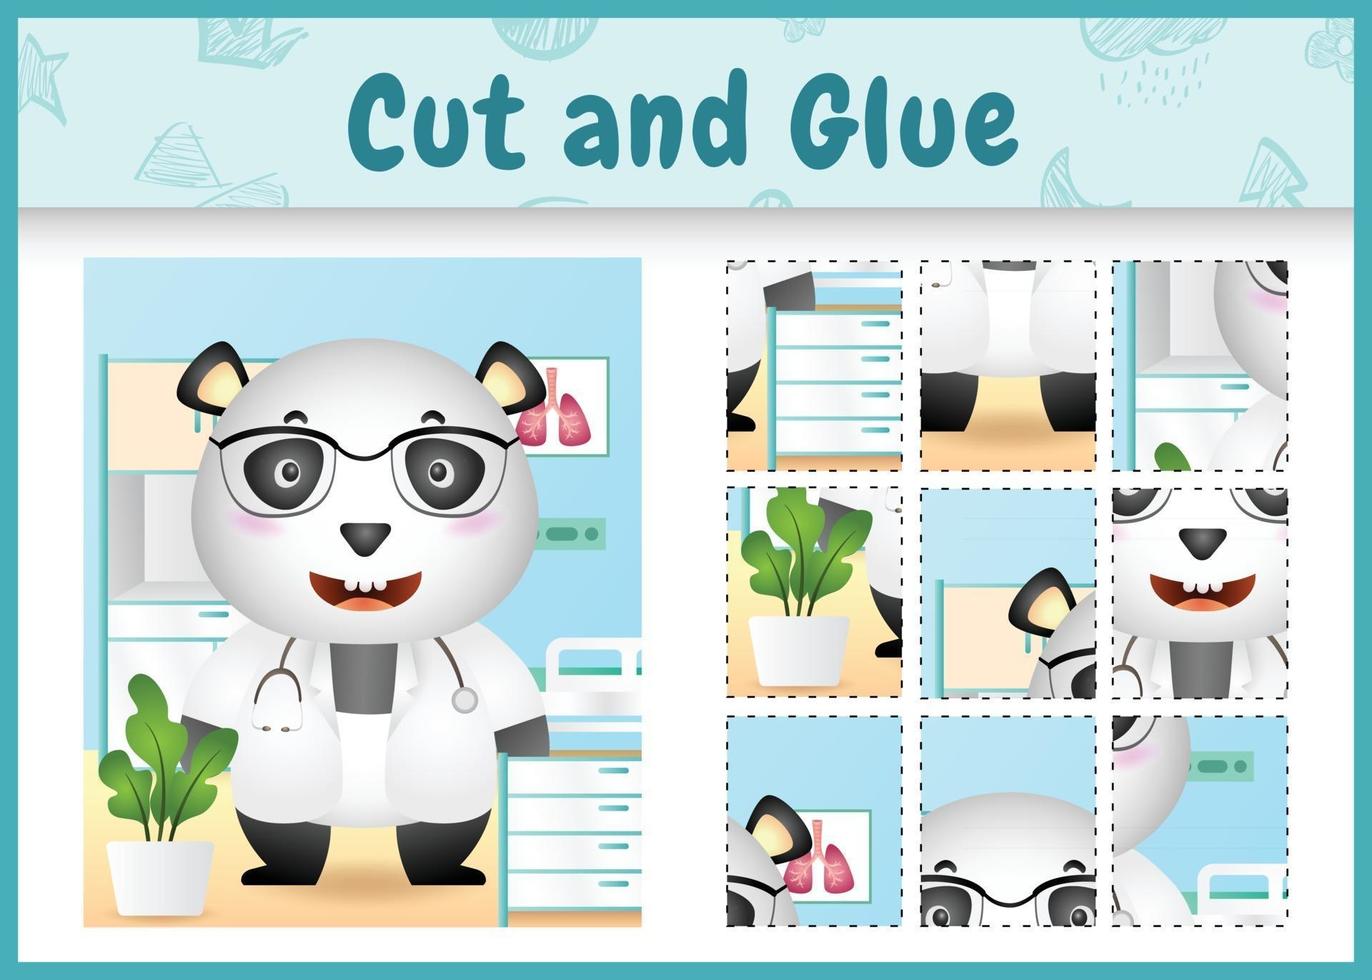 Children board game cut and glue with a cute panda doctor character illustration vector